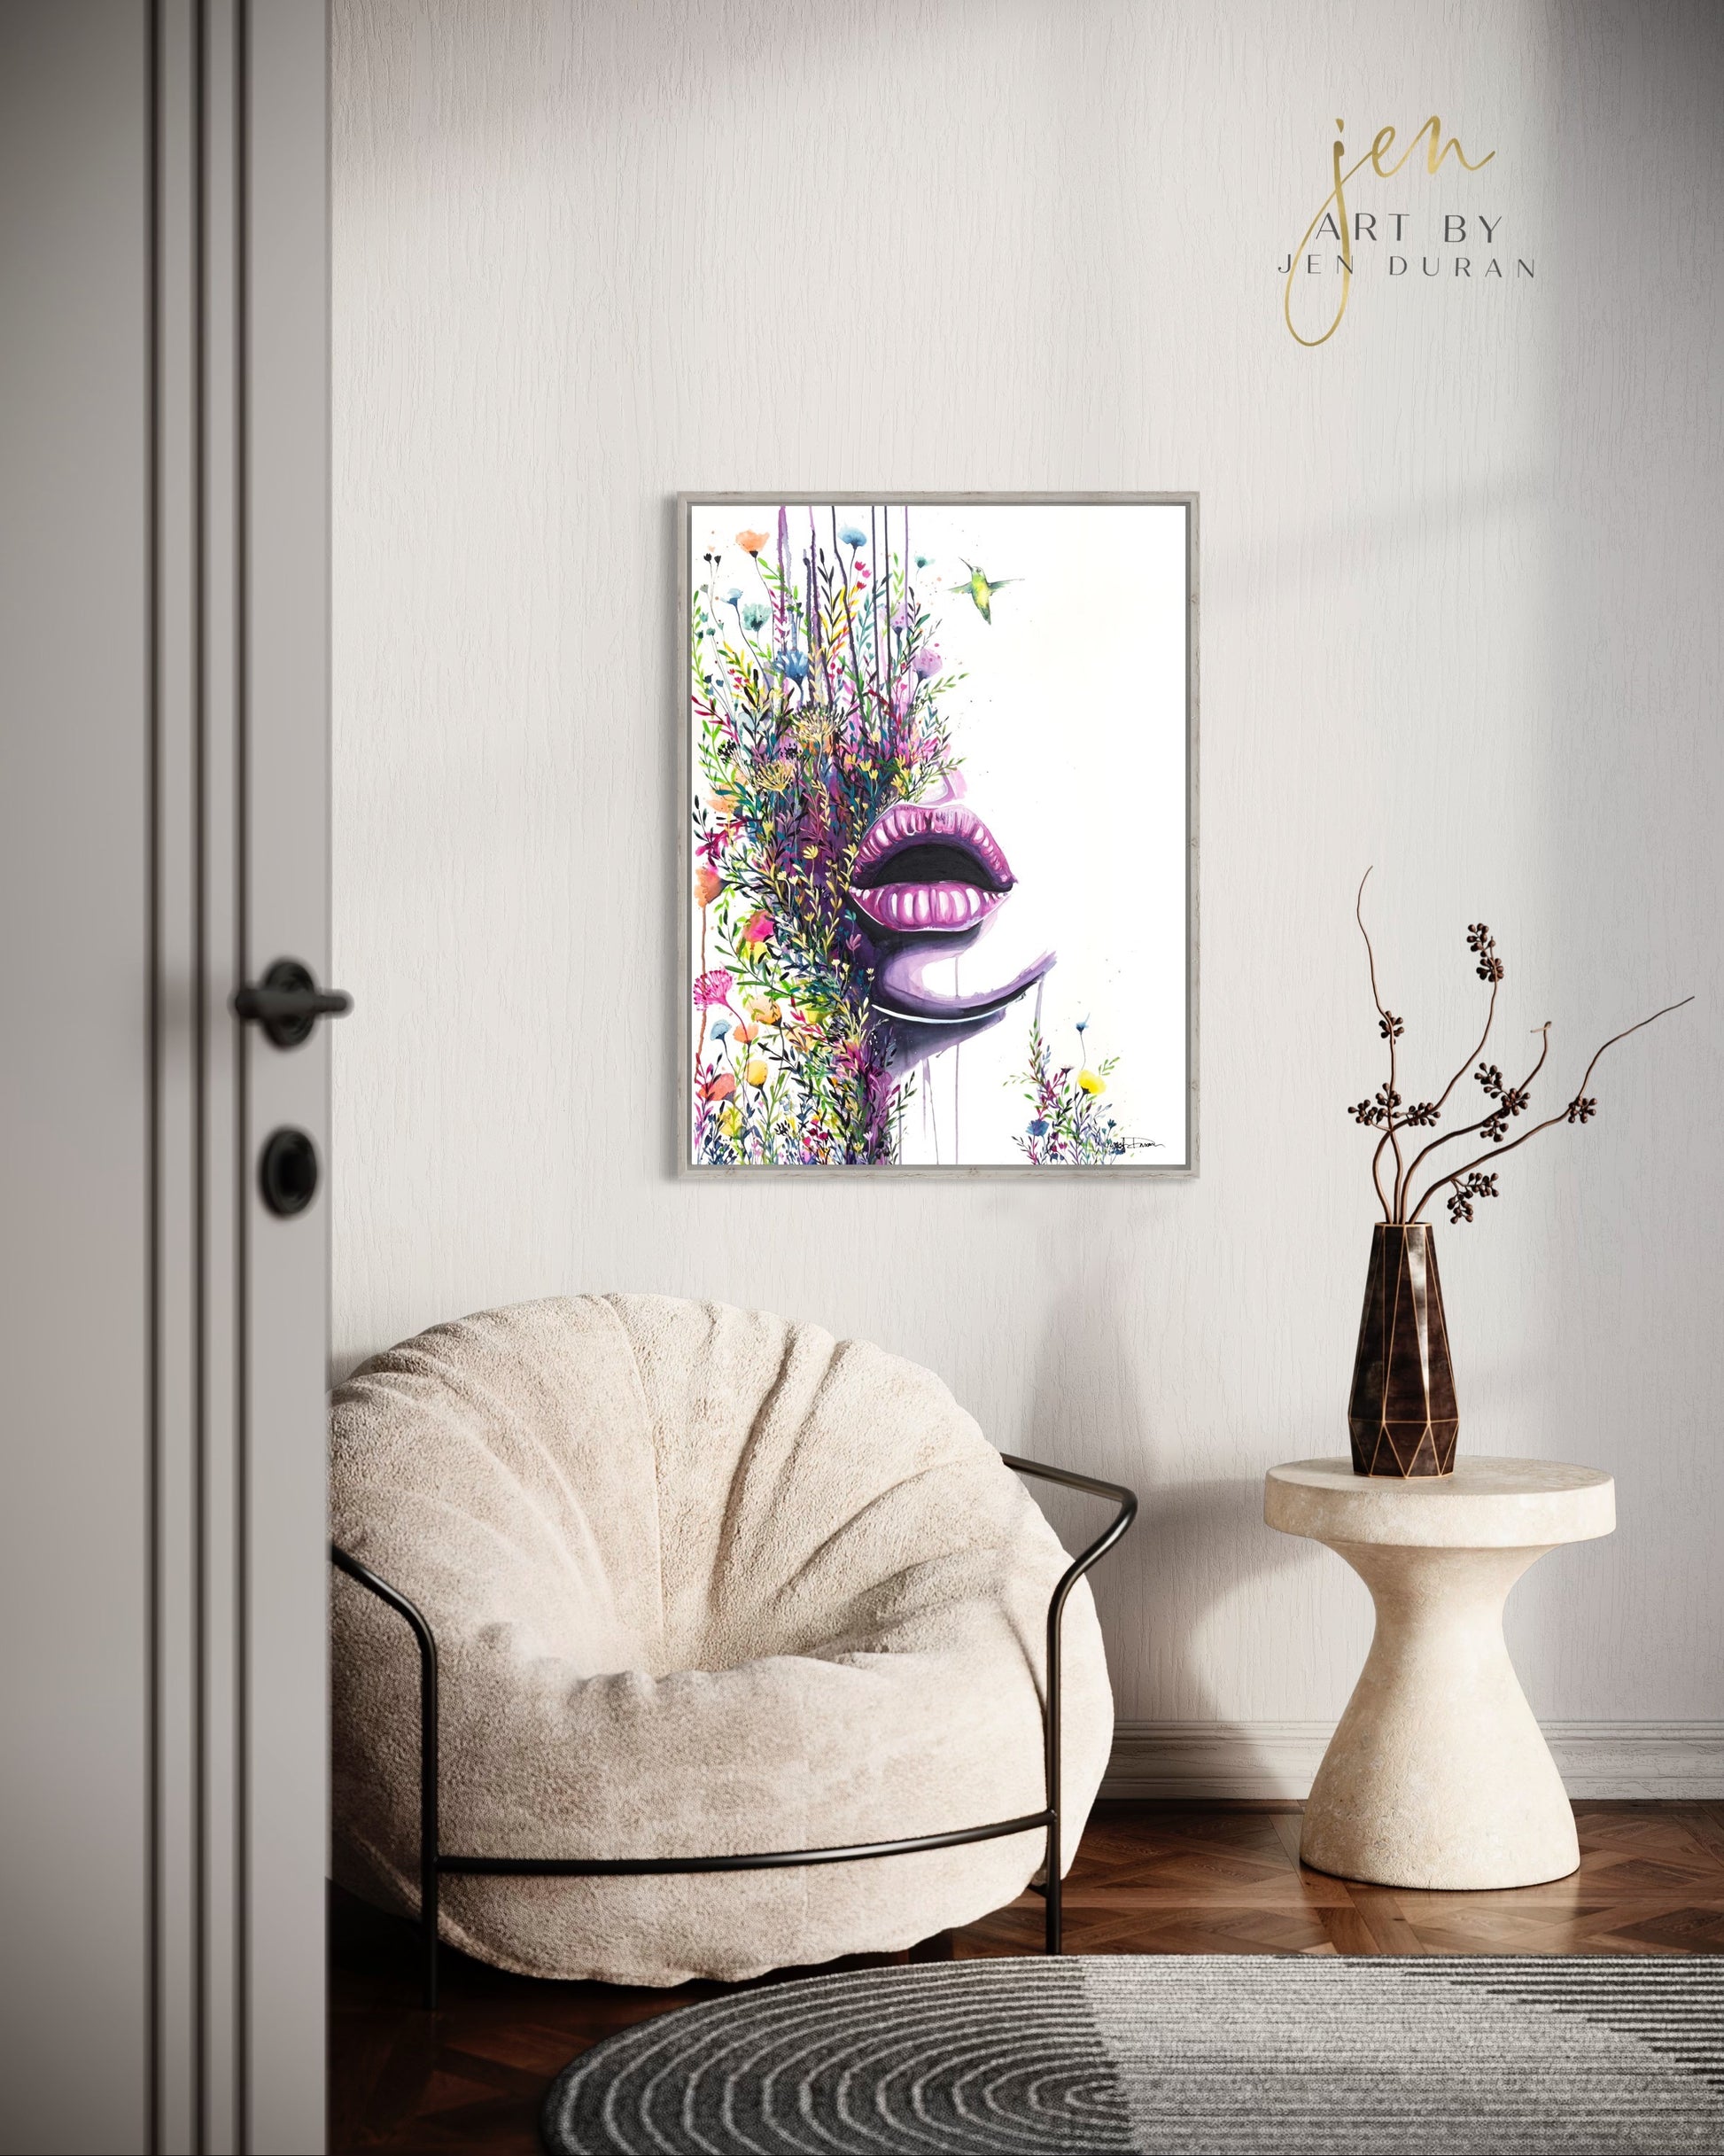 modern art, art print, abstract art, abstract watercolor, floral watercolor, floral art print, canvas wall art, wall art, home decor, modern art print, art for walls, unique home decor, best gift, unique gift ideas, art by jen duran